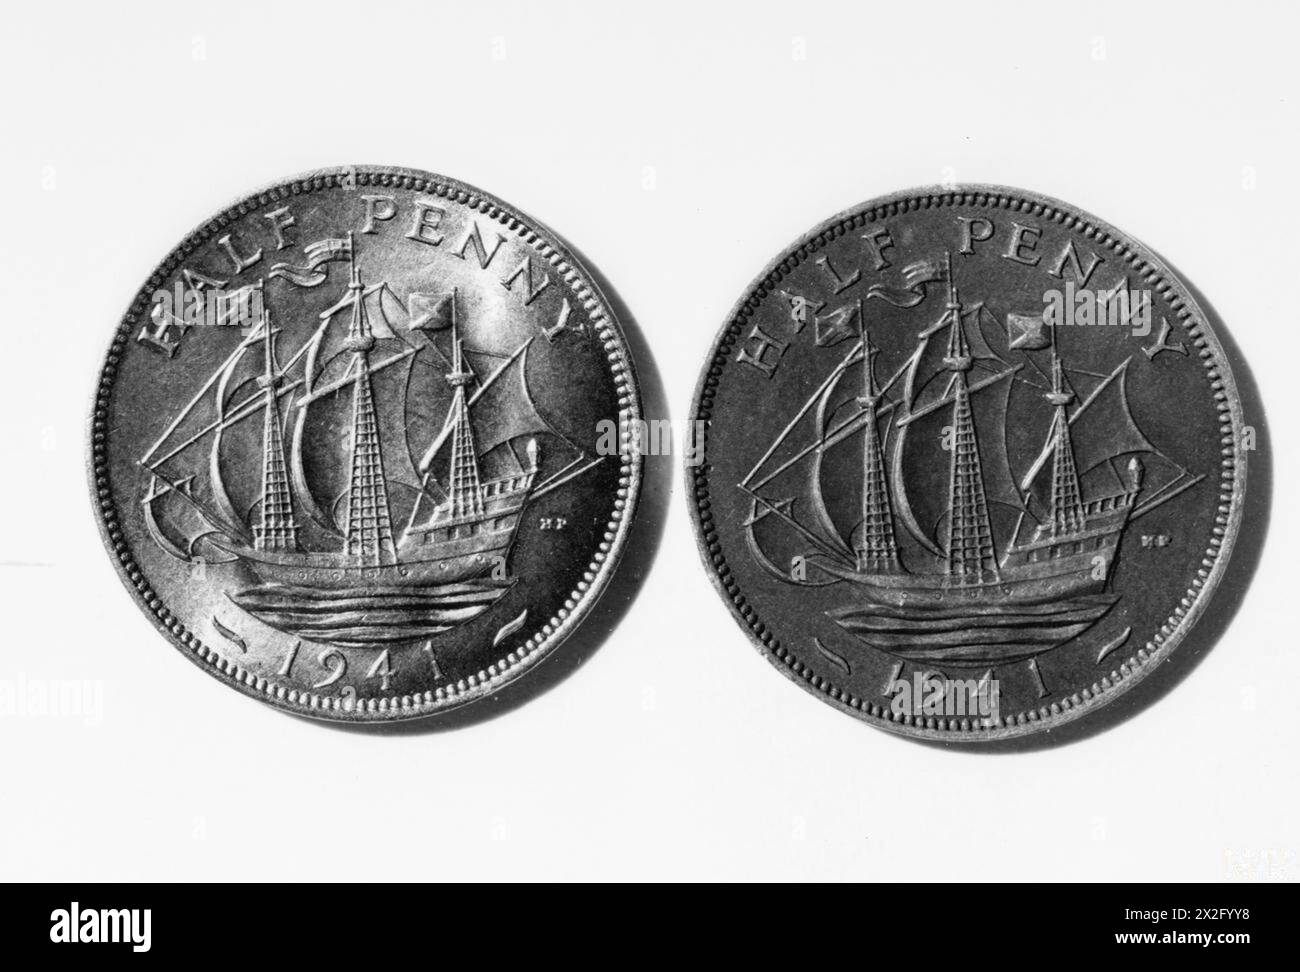 TWO HALFPENNIES SHOWING THE TAIL SIDES. DEPICTING A SAILING SHIP OF THE ELIZABETHAN ERA. - , Stock Photo